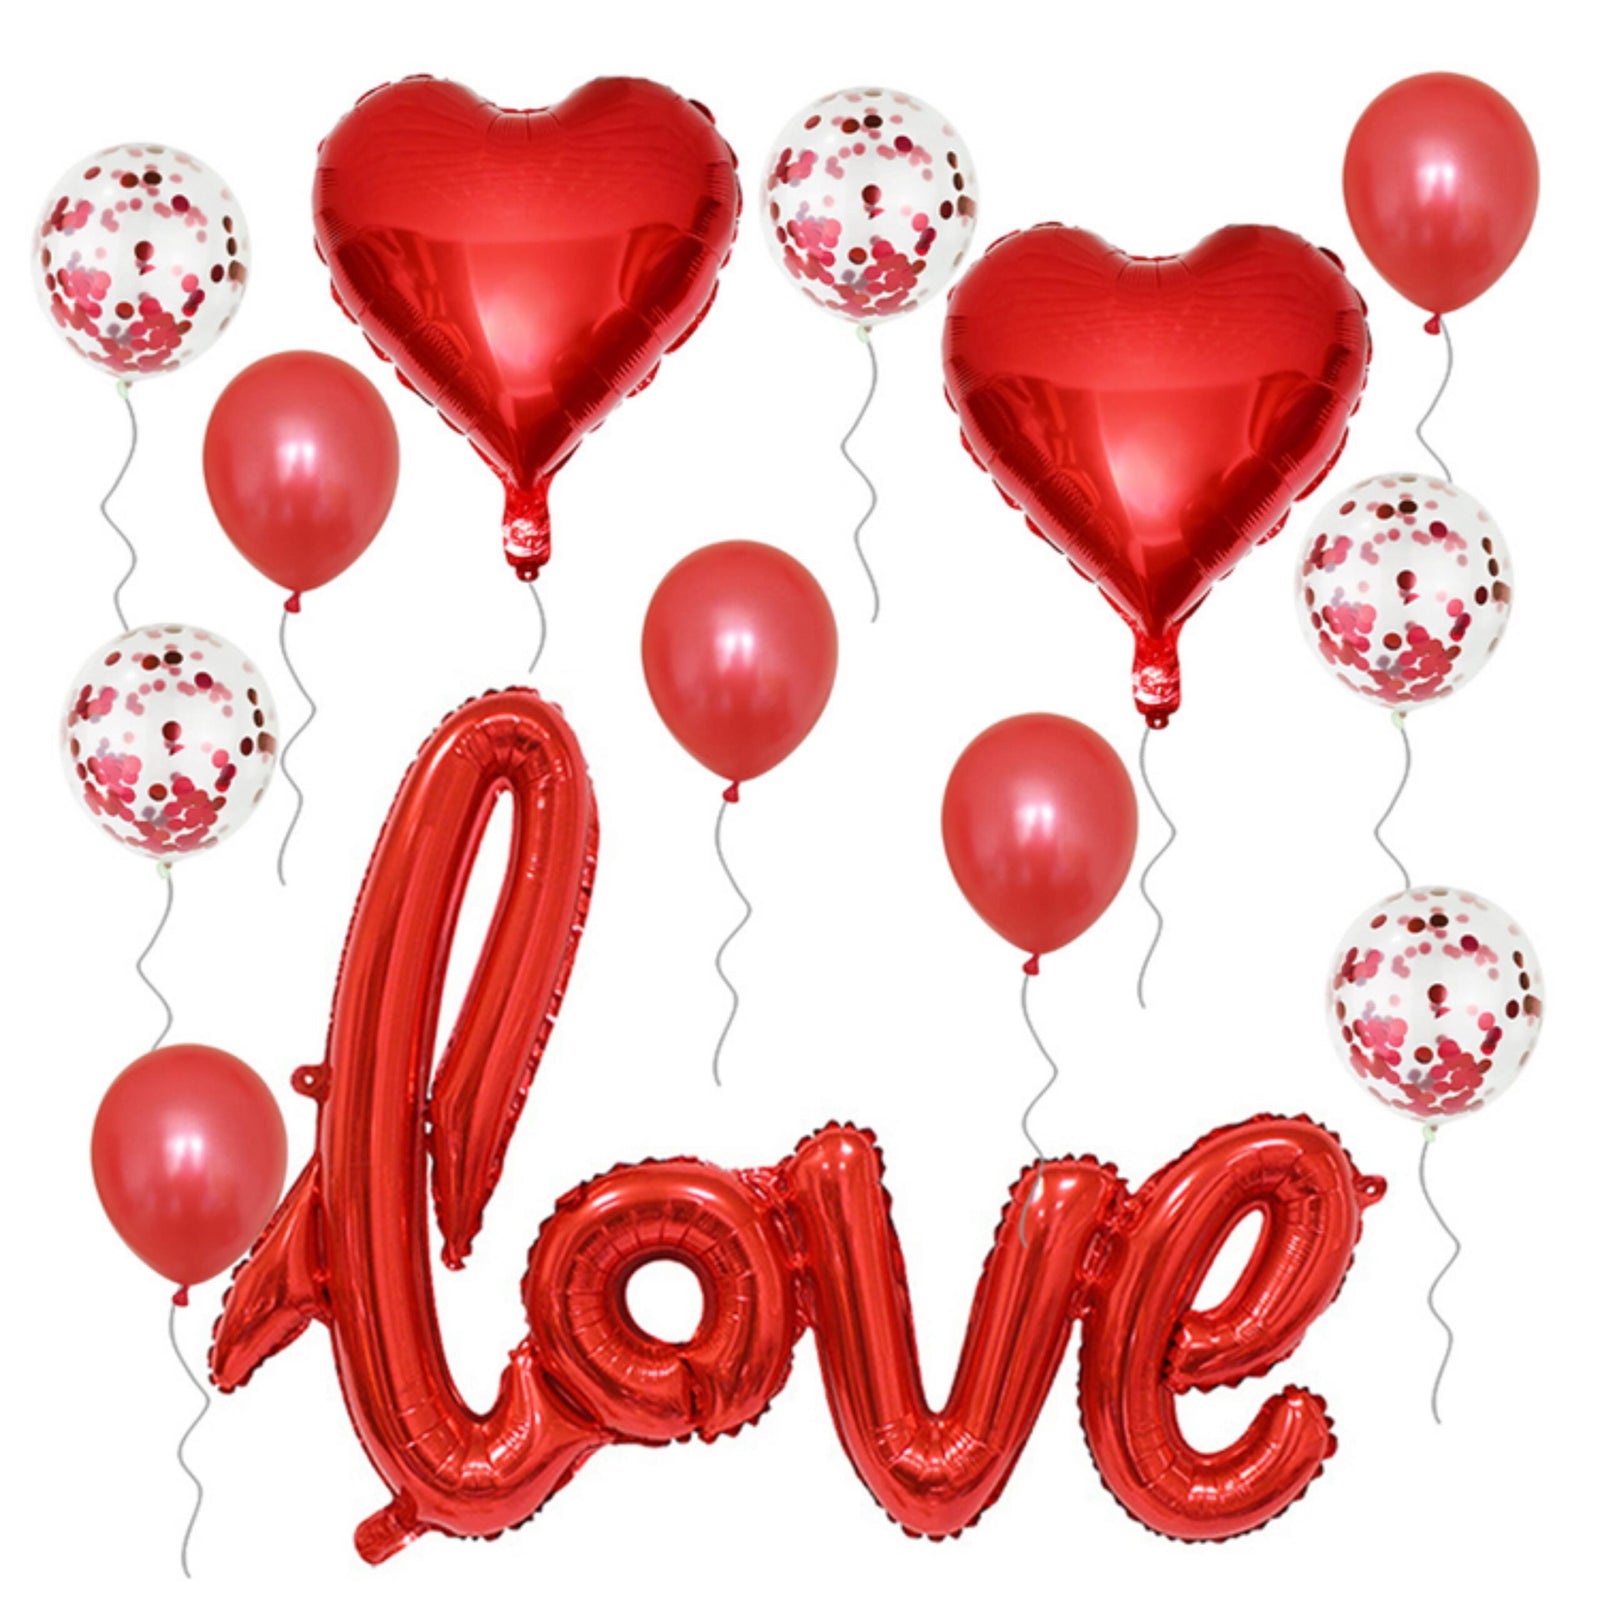 Red Love Shape Letter Foil Balloon for Birthday Wedding Valentine’s Day Engagement Party Decorations (15 piece)